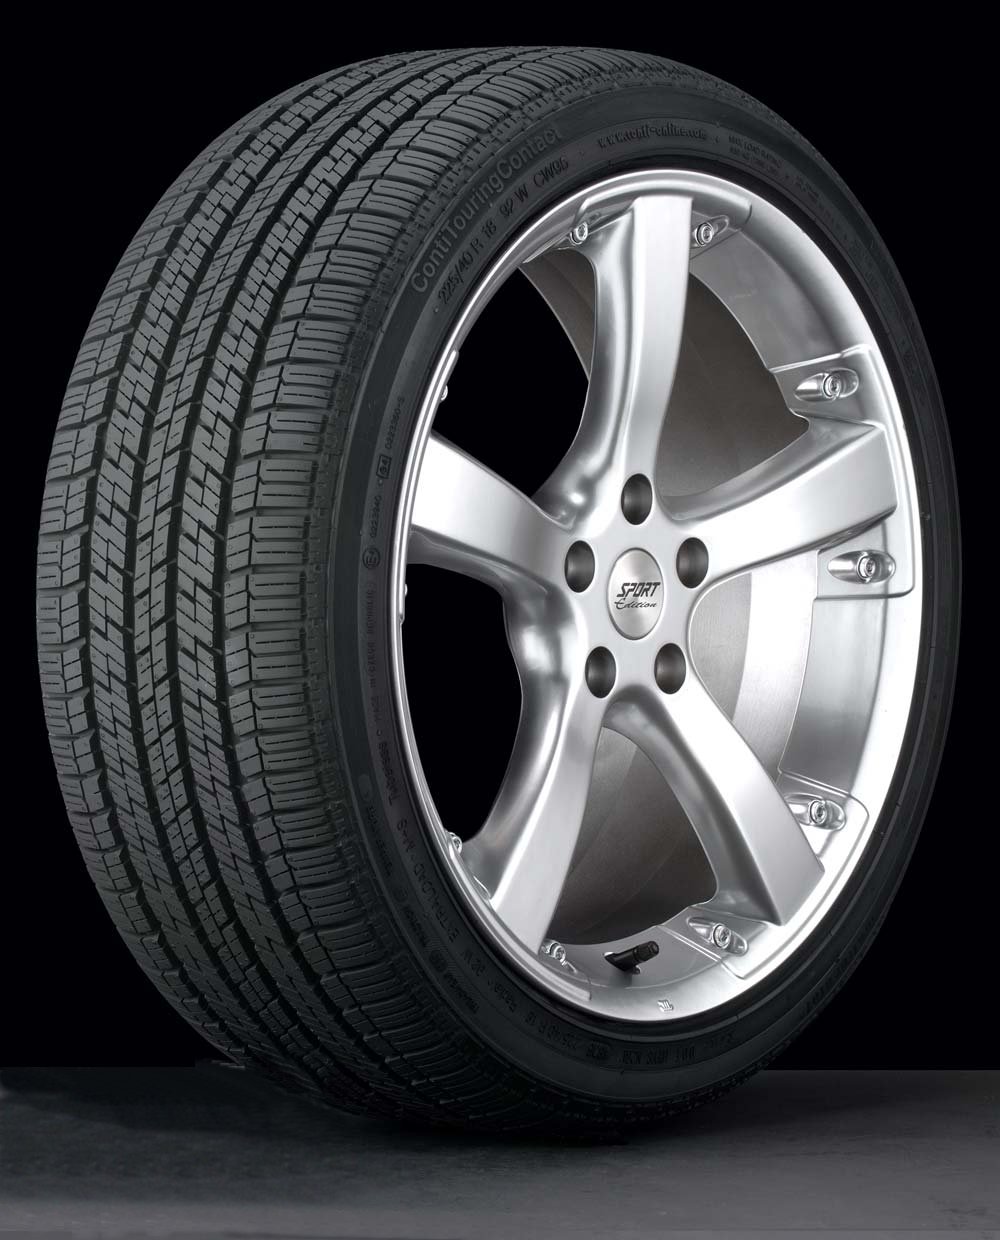 Download this Continental Tires For Car And Light Truck picture